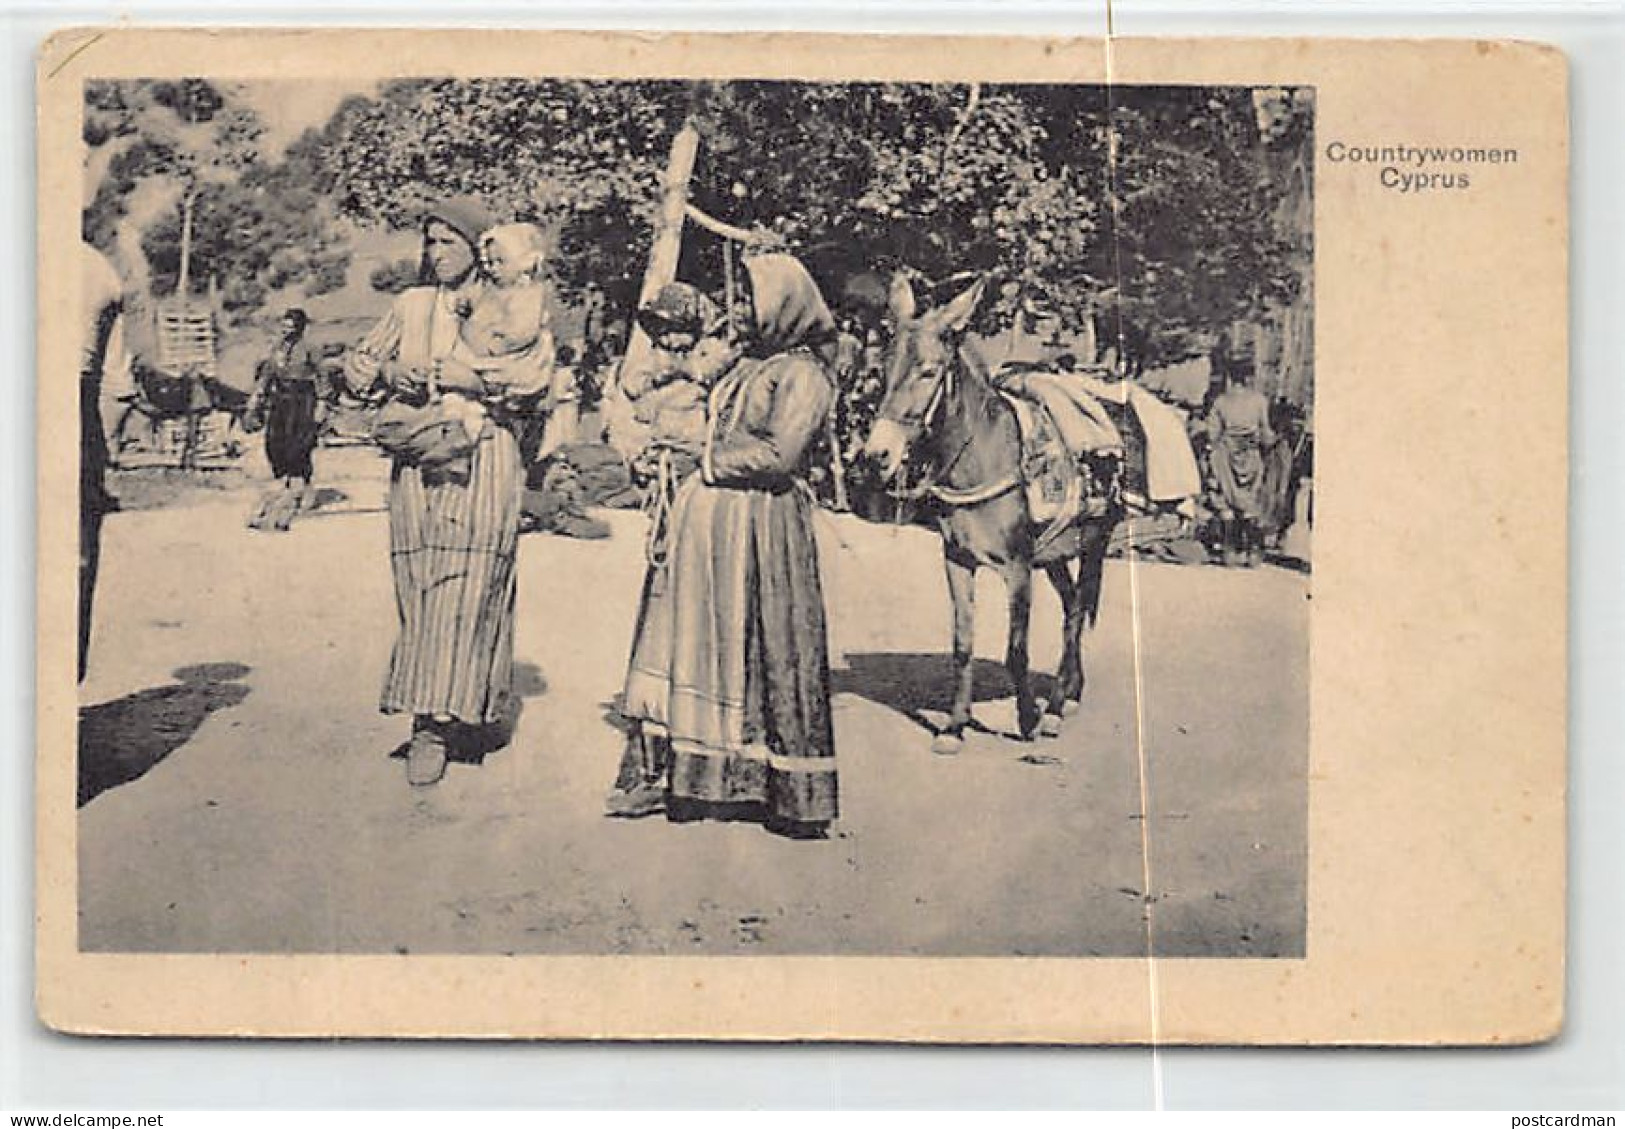 Cyprus - Countrywomen - SEE SCANS FOR CONDITION - Publ. J. P. Foscolo - Zypern